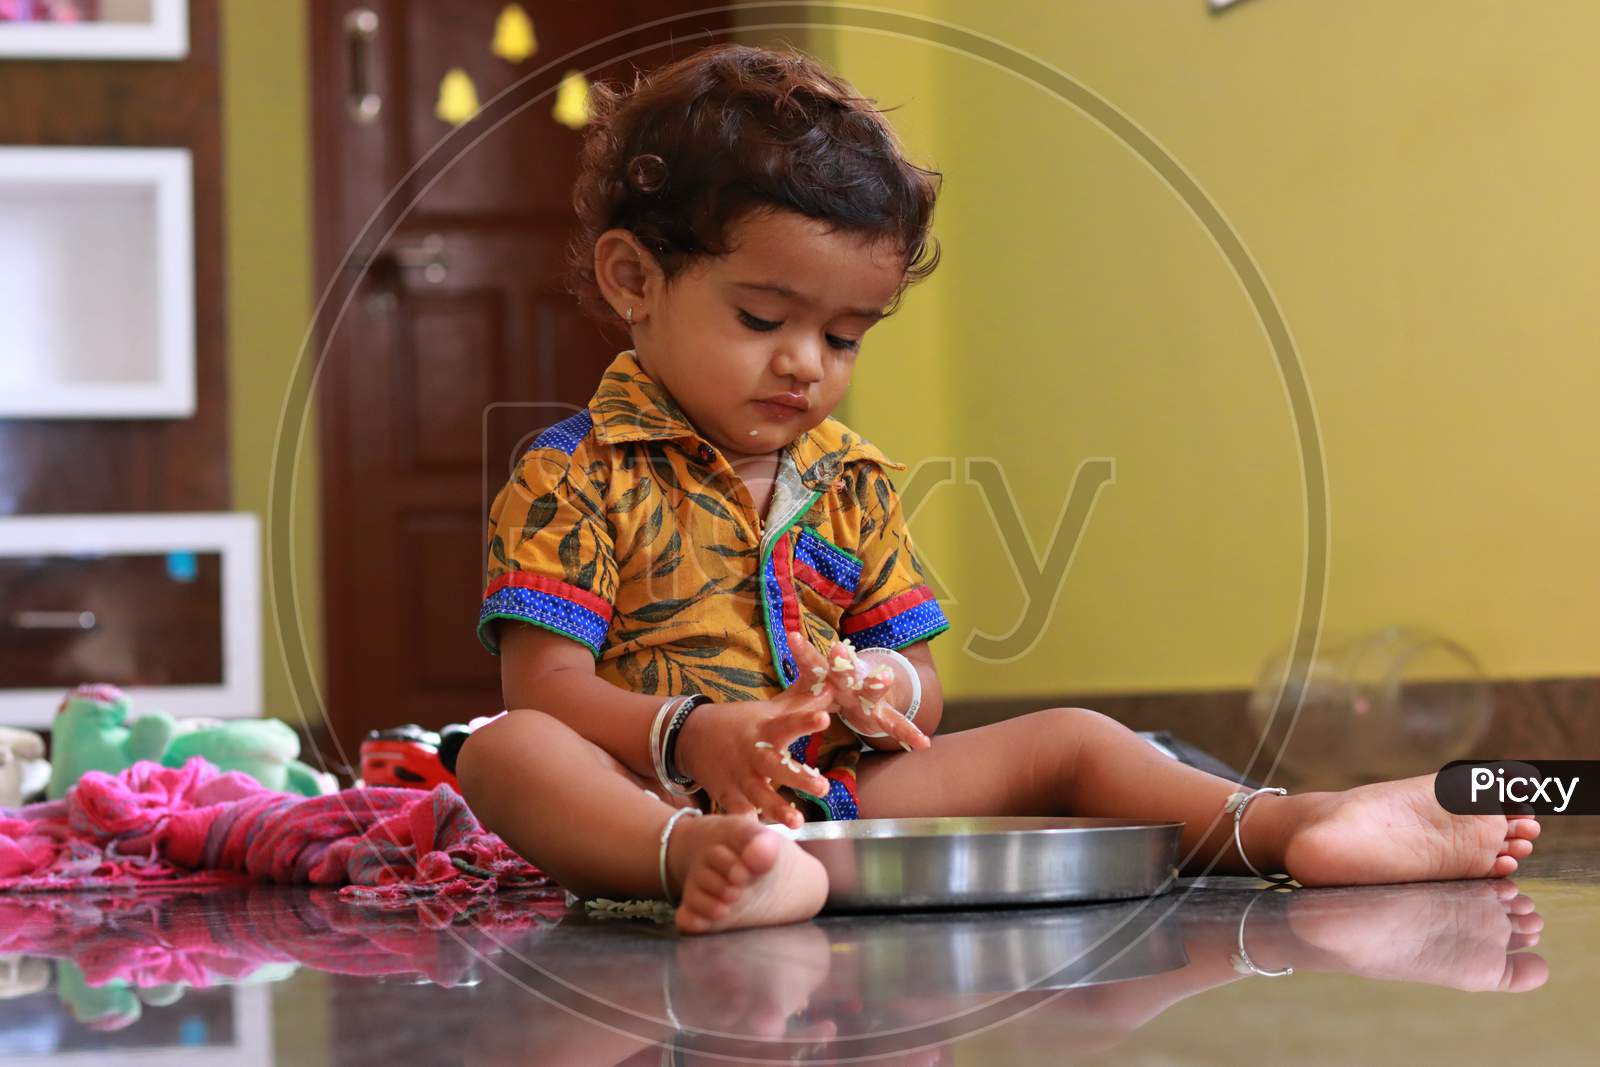 A Child Looking At Food In A Plate